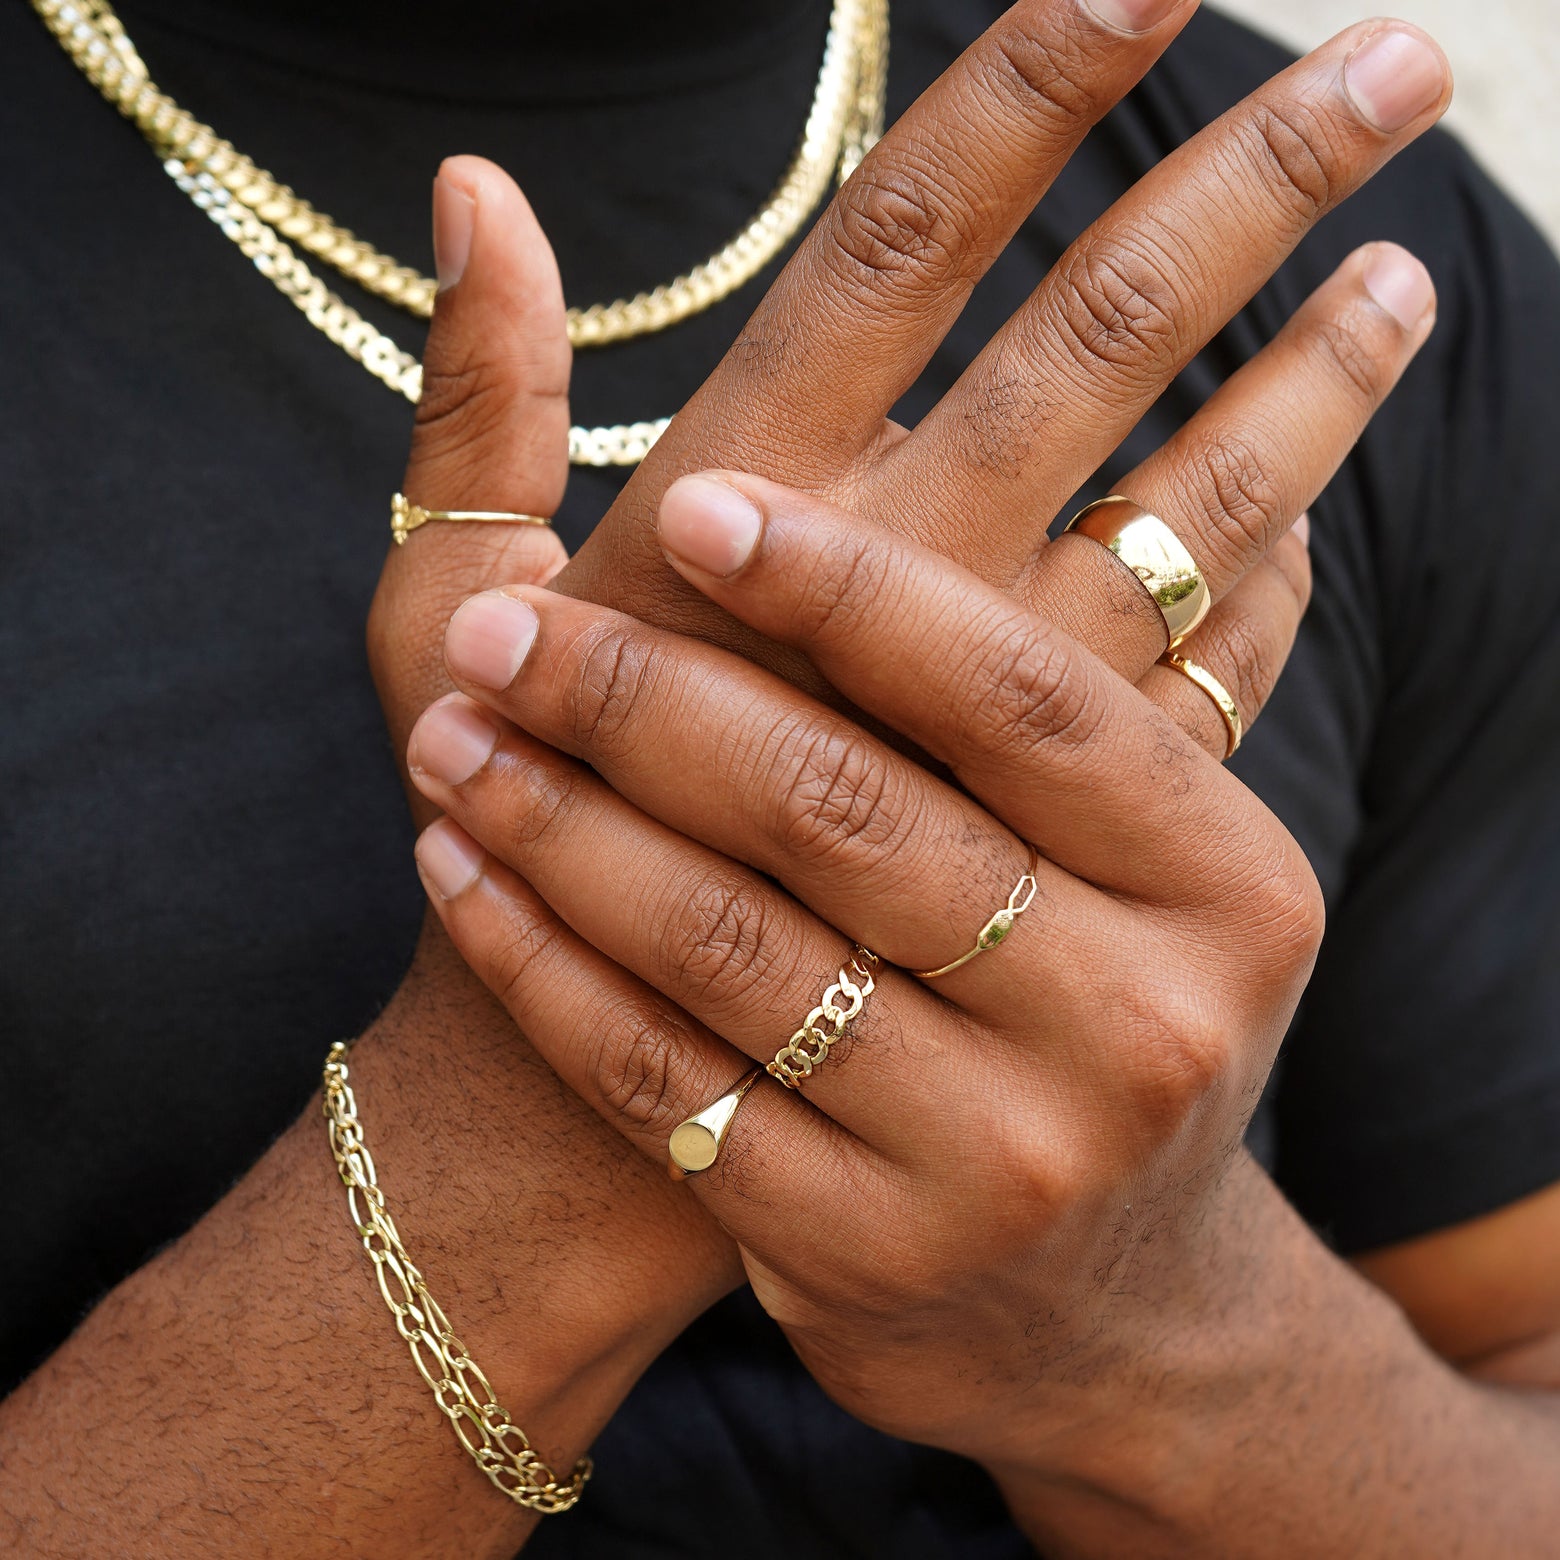 A model gently holding their palm while wearing various Automic gold jewelry